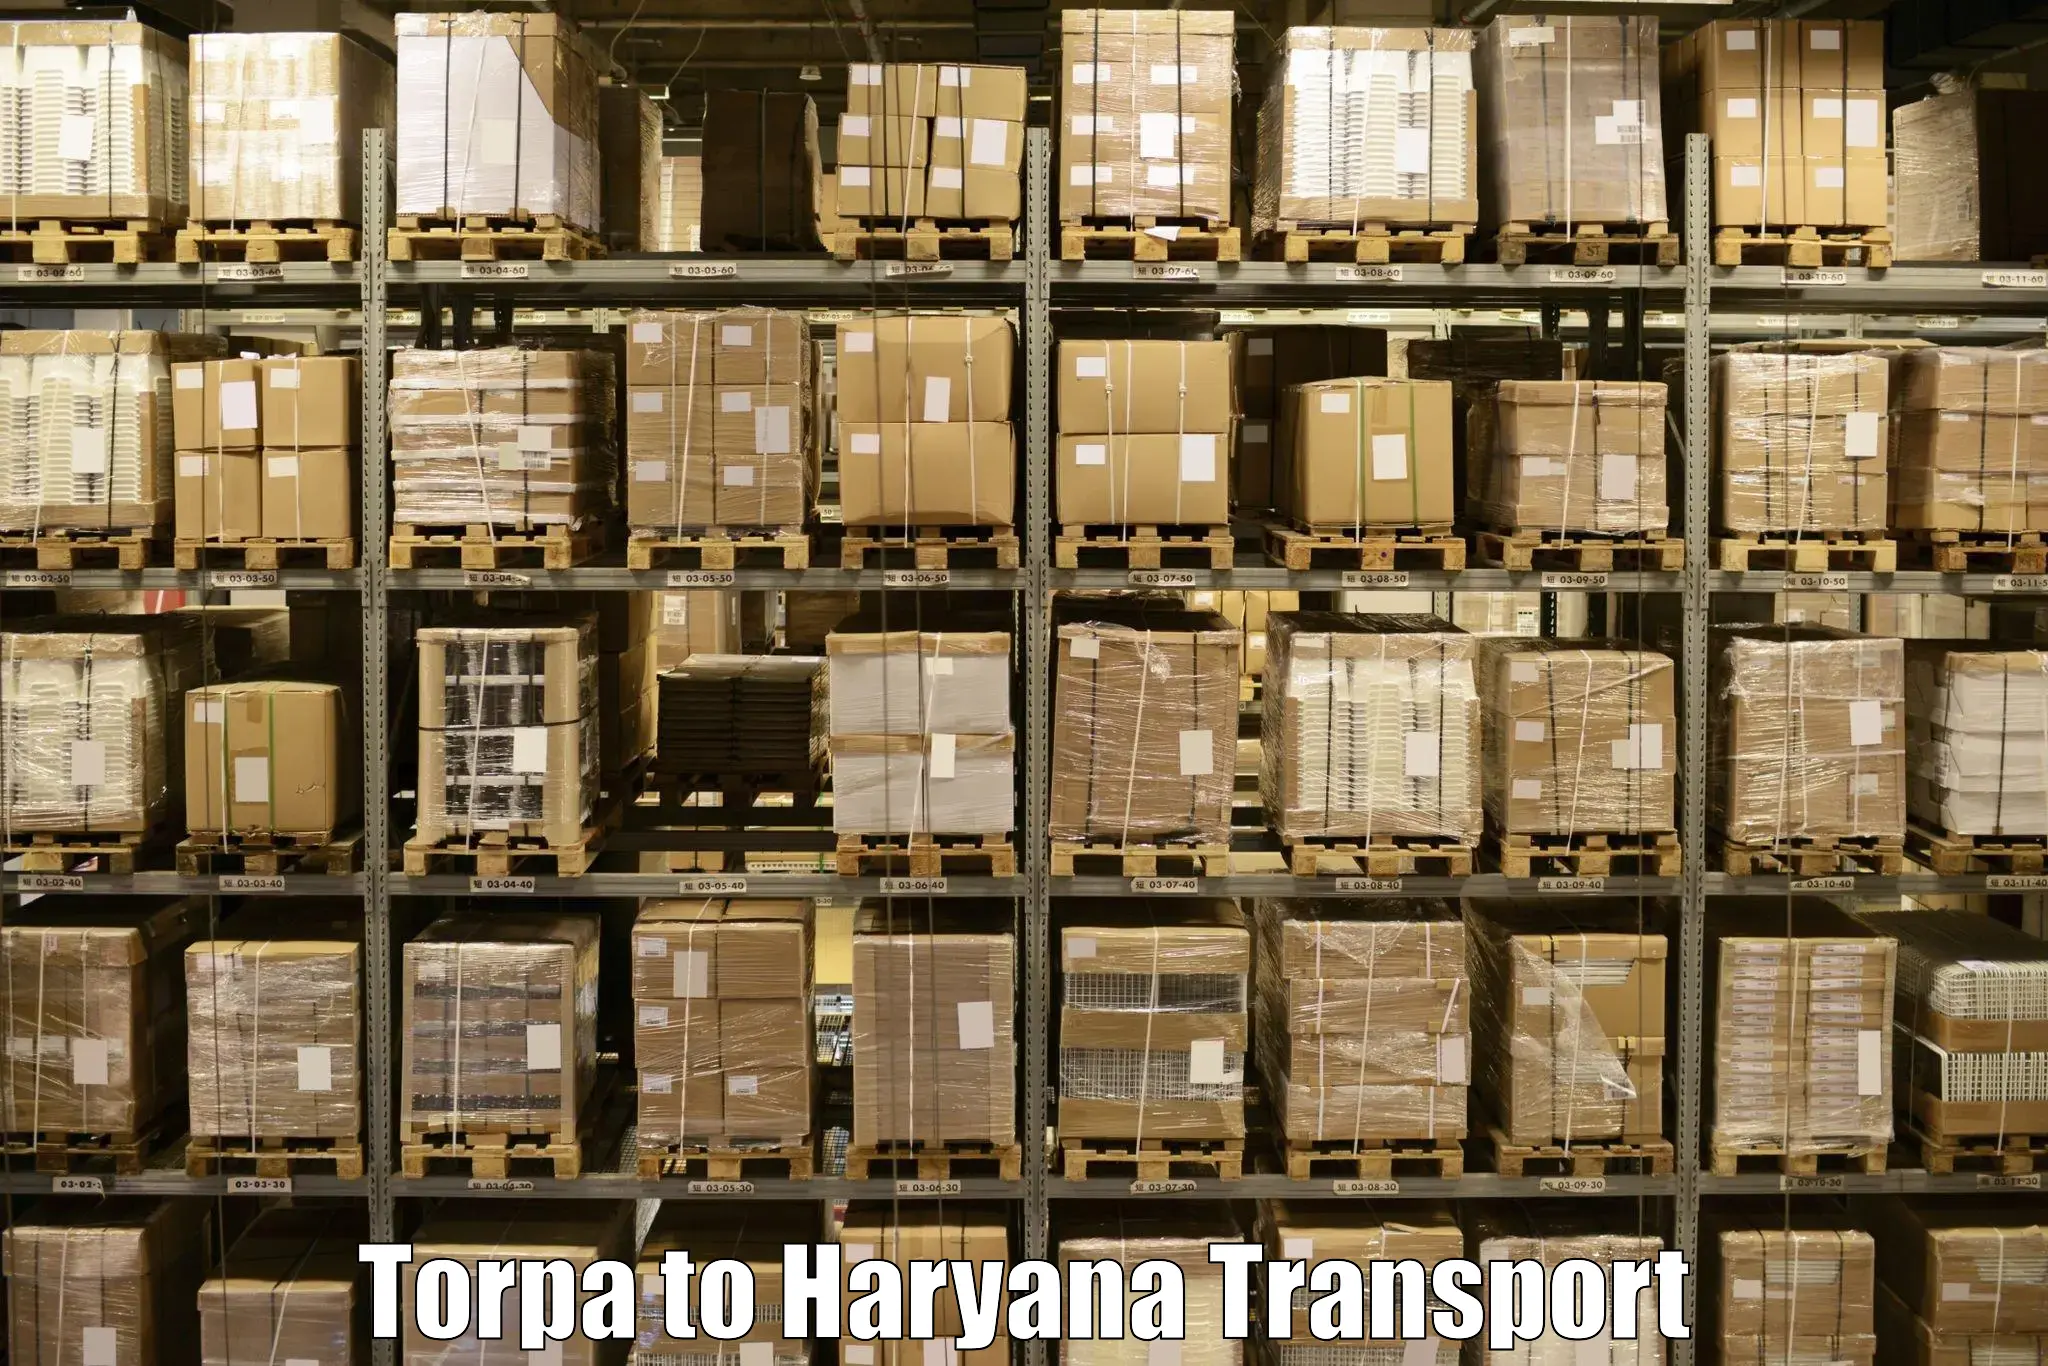 Commercial transport service Torpa to Ratia